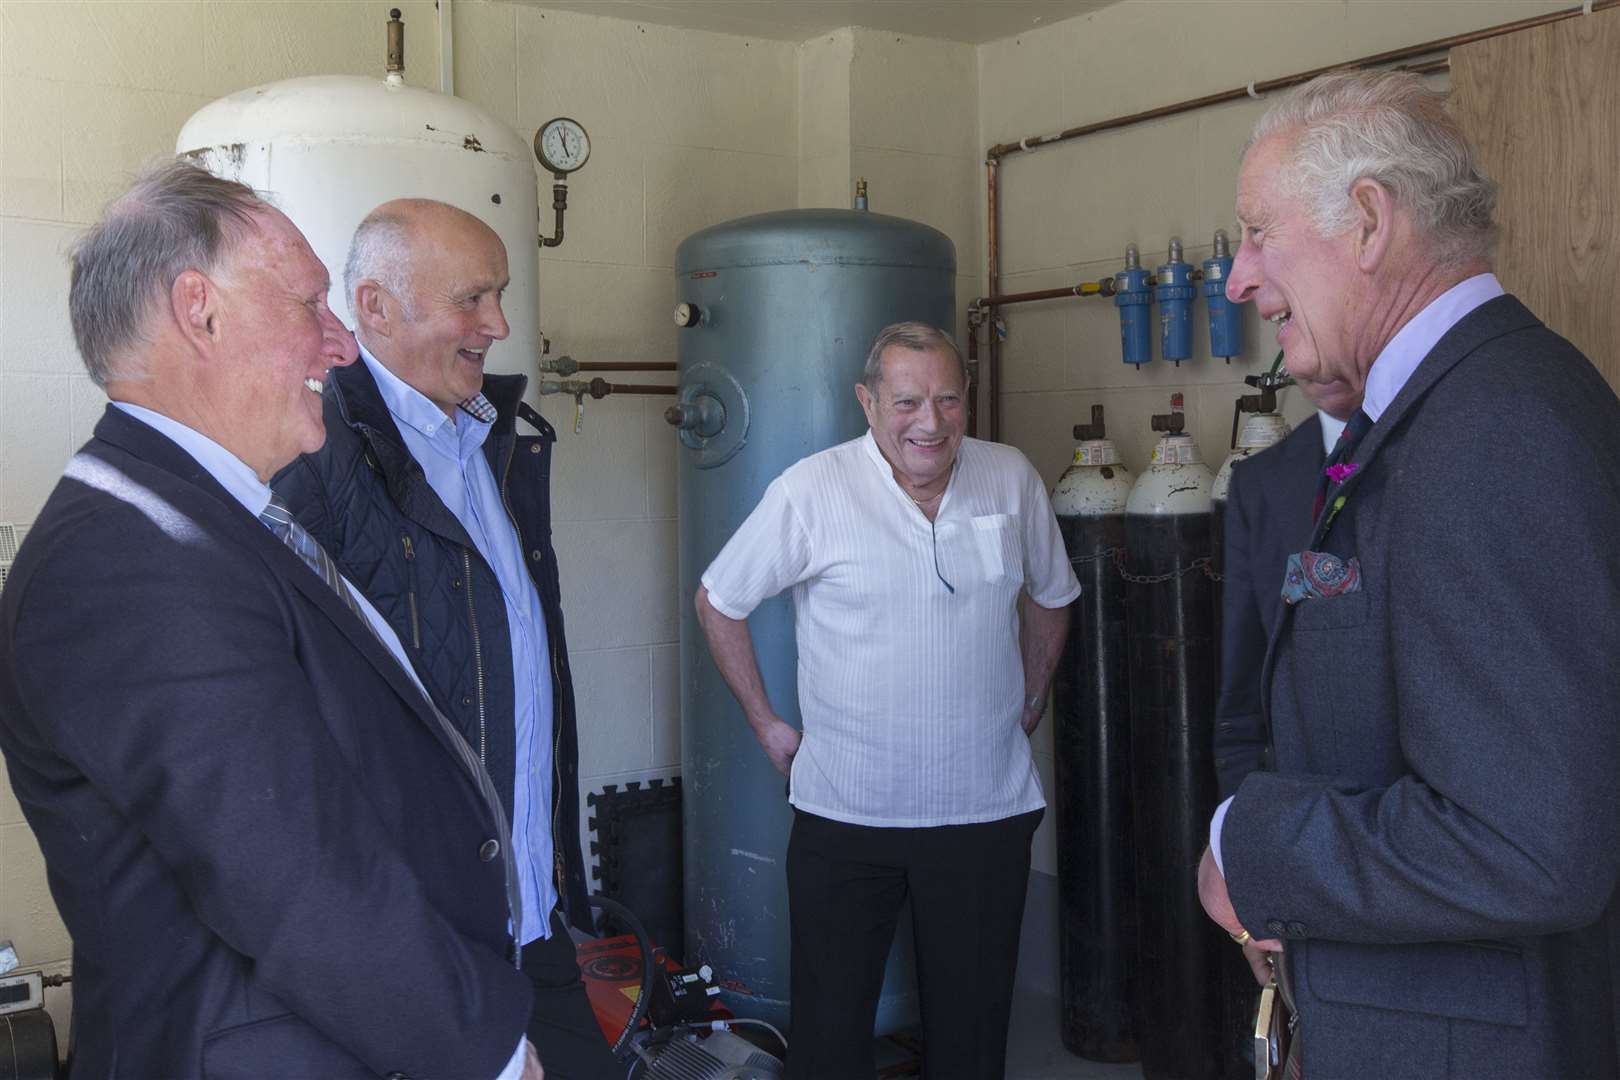 The Duke of Rothesay chats with David Steven (left), managing director of D Steven & Son, the haulage firm that transports the Healing Hub oxygen cylinders, and one of his drivers, Alex Martin. Looking on is Healing Hub volunteer Alan Mowat. Picture: Robert MacDonald / Northern Studios